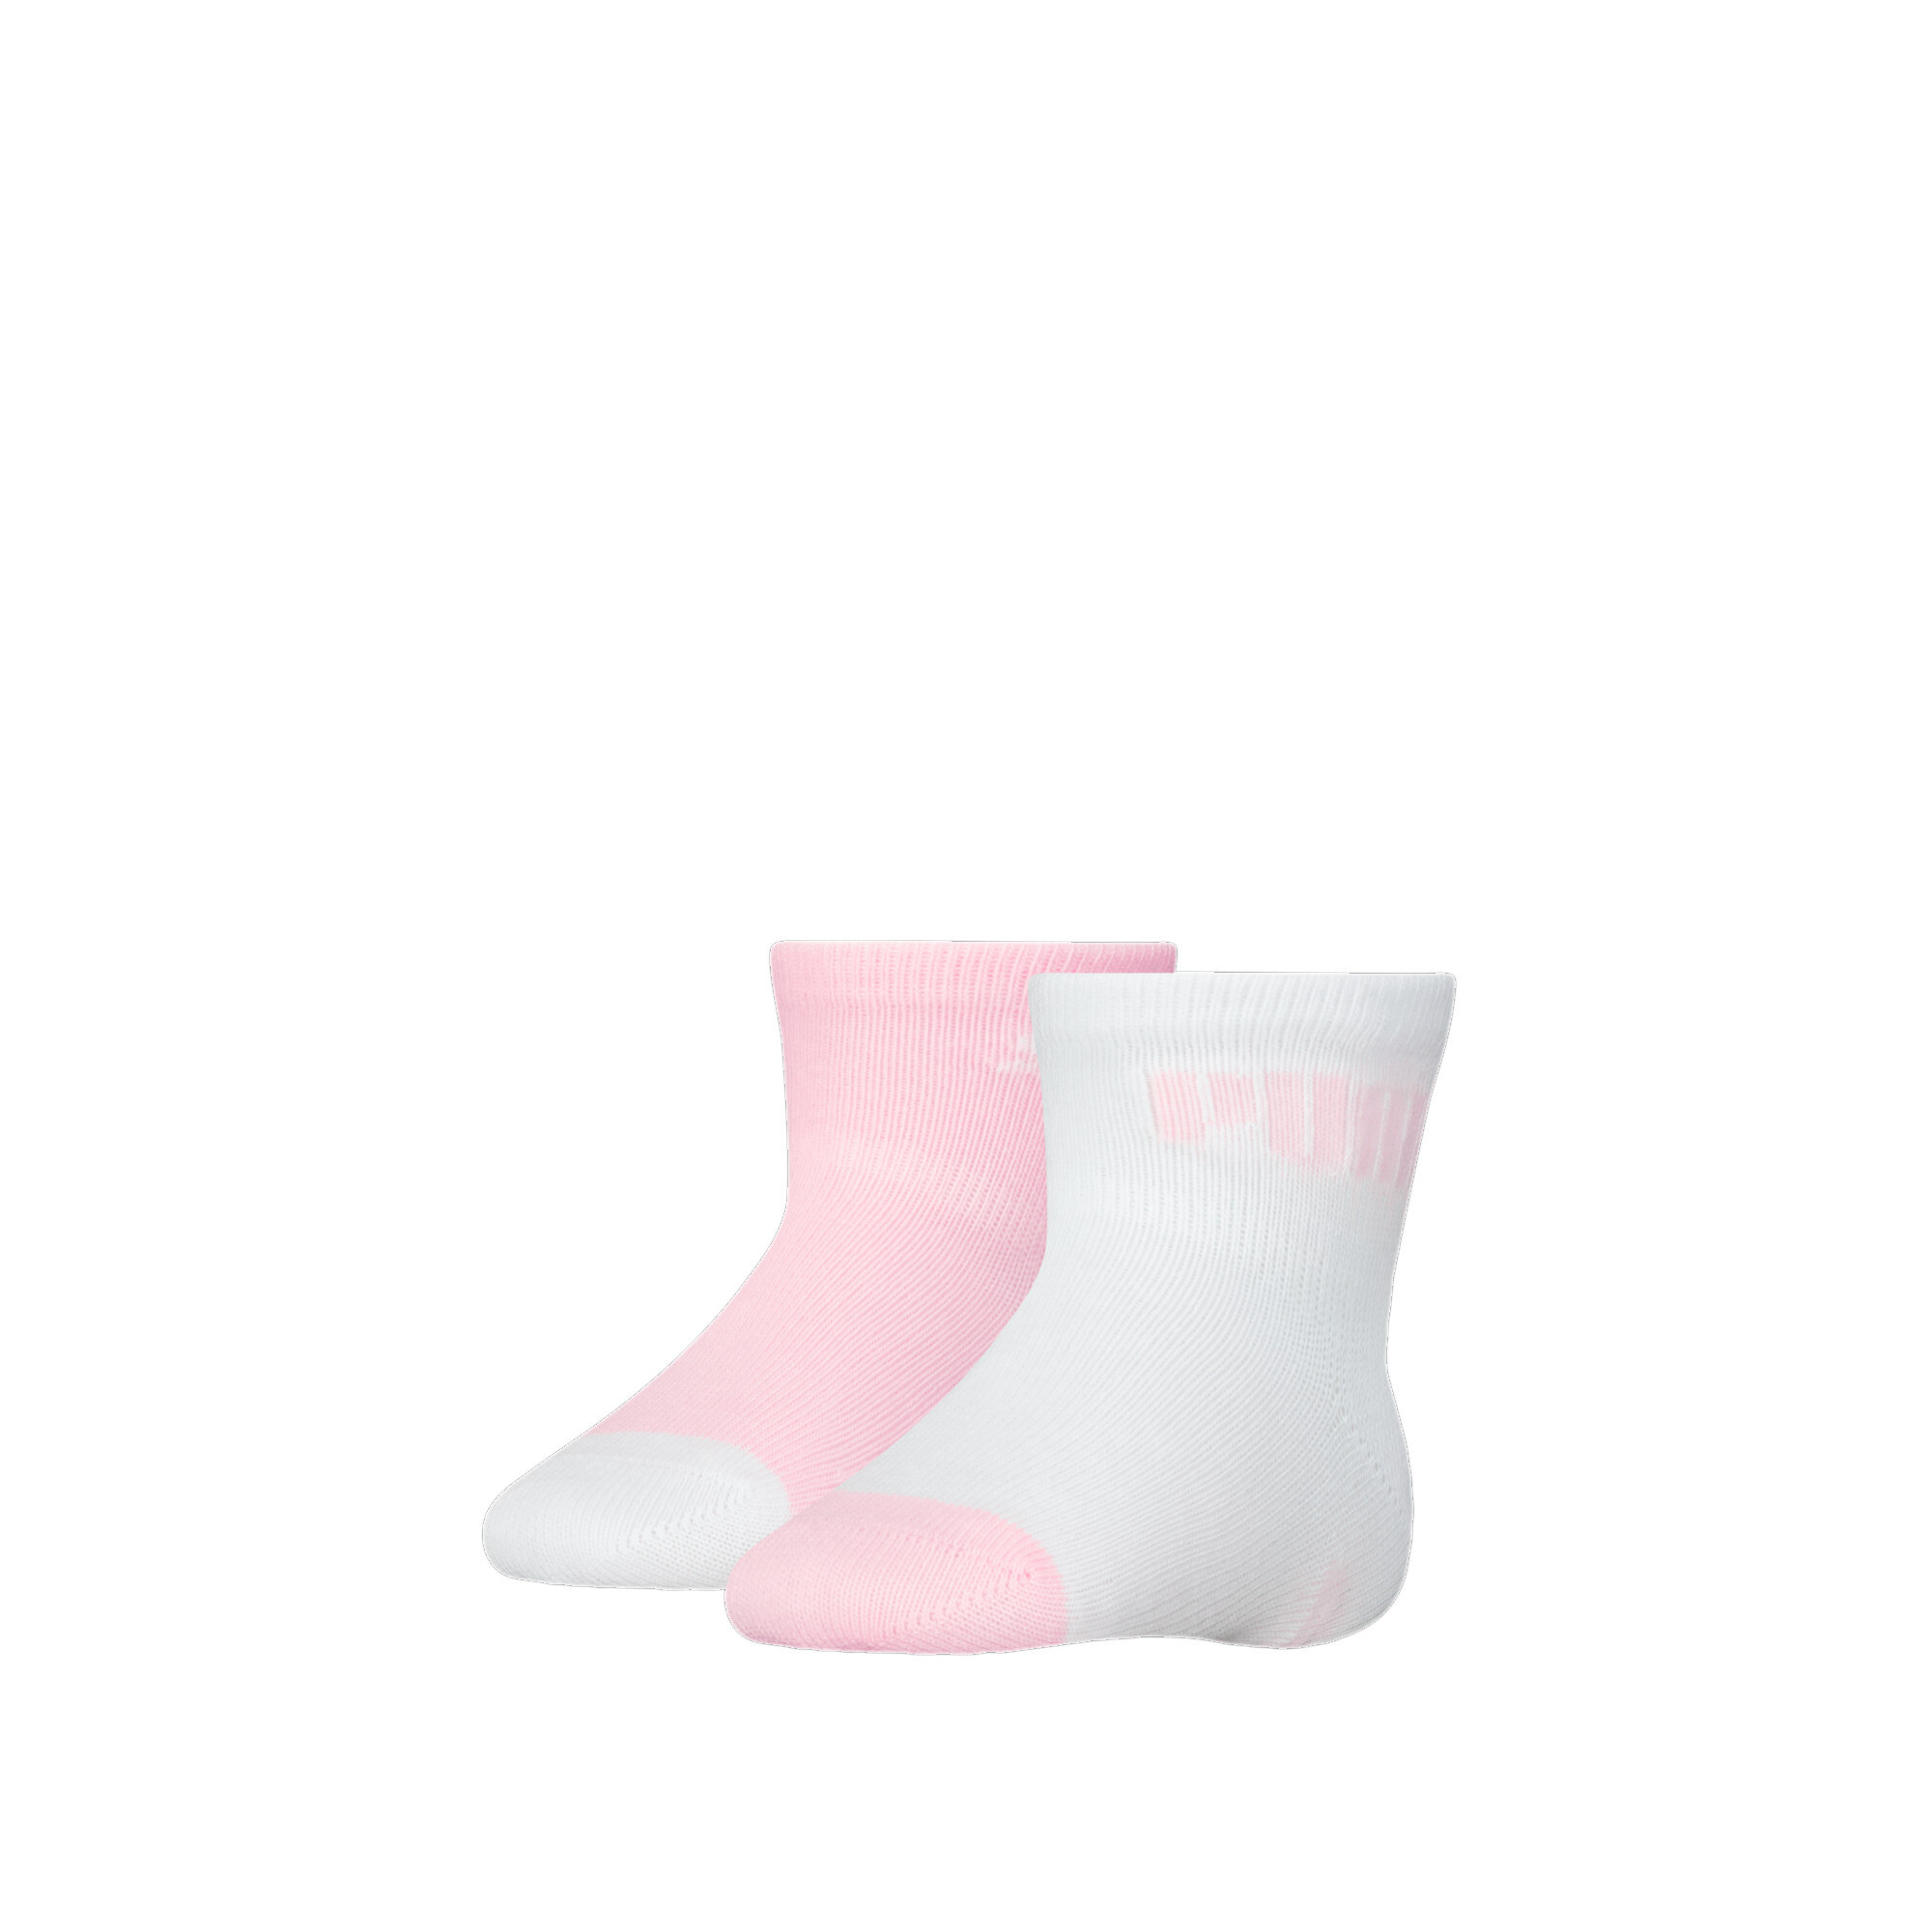 Puma Baby Classic Socks 2 Pack, Pink, Size 23-26, Age